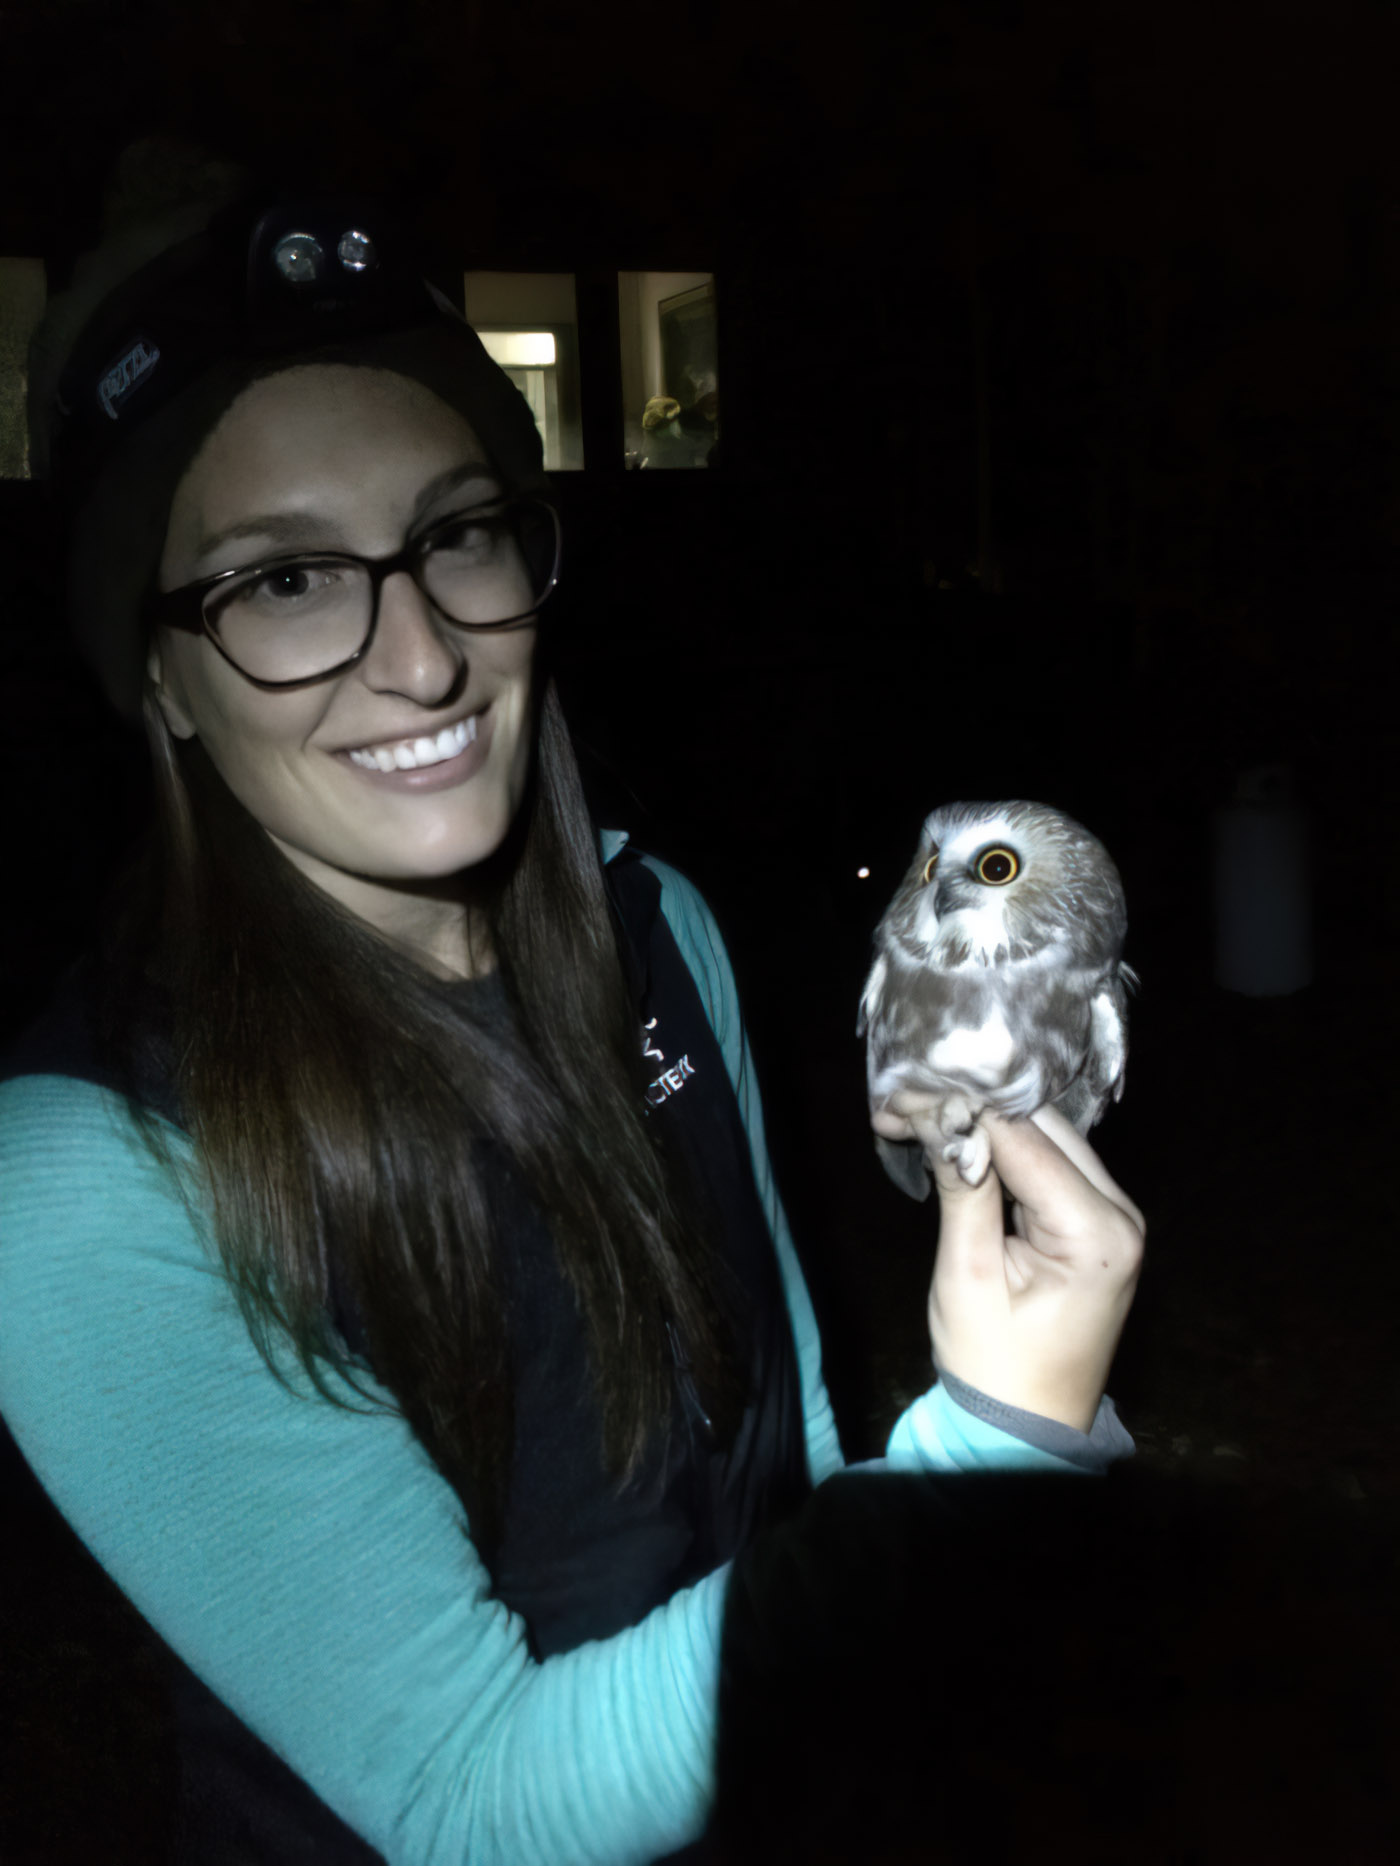 Natasha Crosland, a woman with long brown hair and glasses, wearing a teal shirt and a black vest, in a dark room holding an owl.